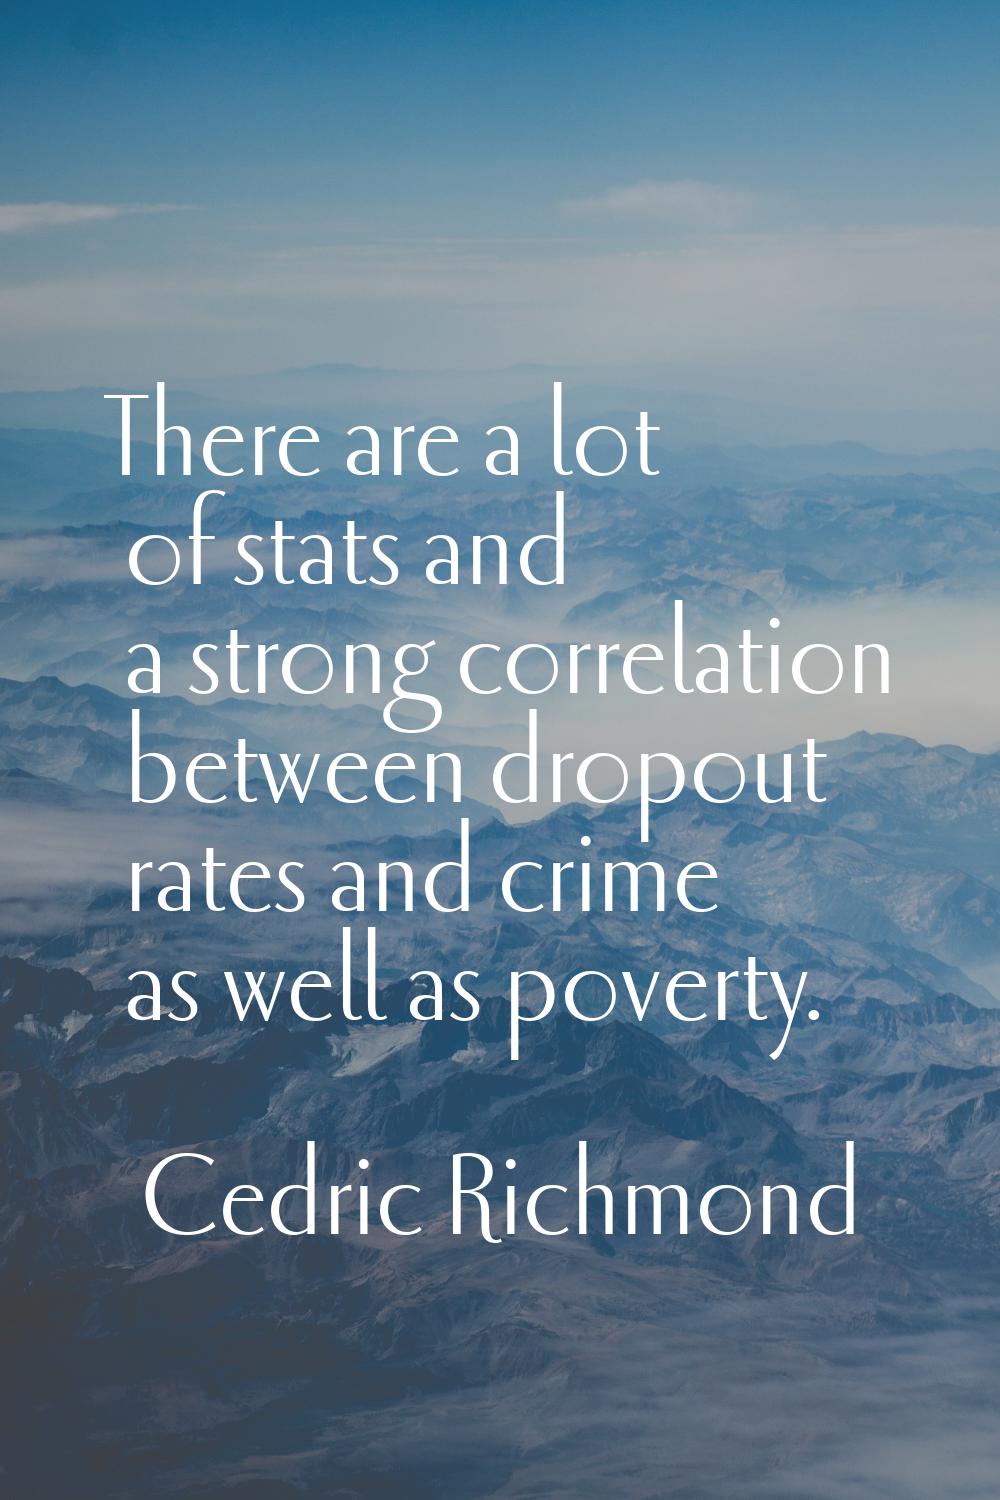 There are a lot of stats and a strong correlation between dropout rates and crime as well as povert